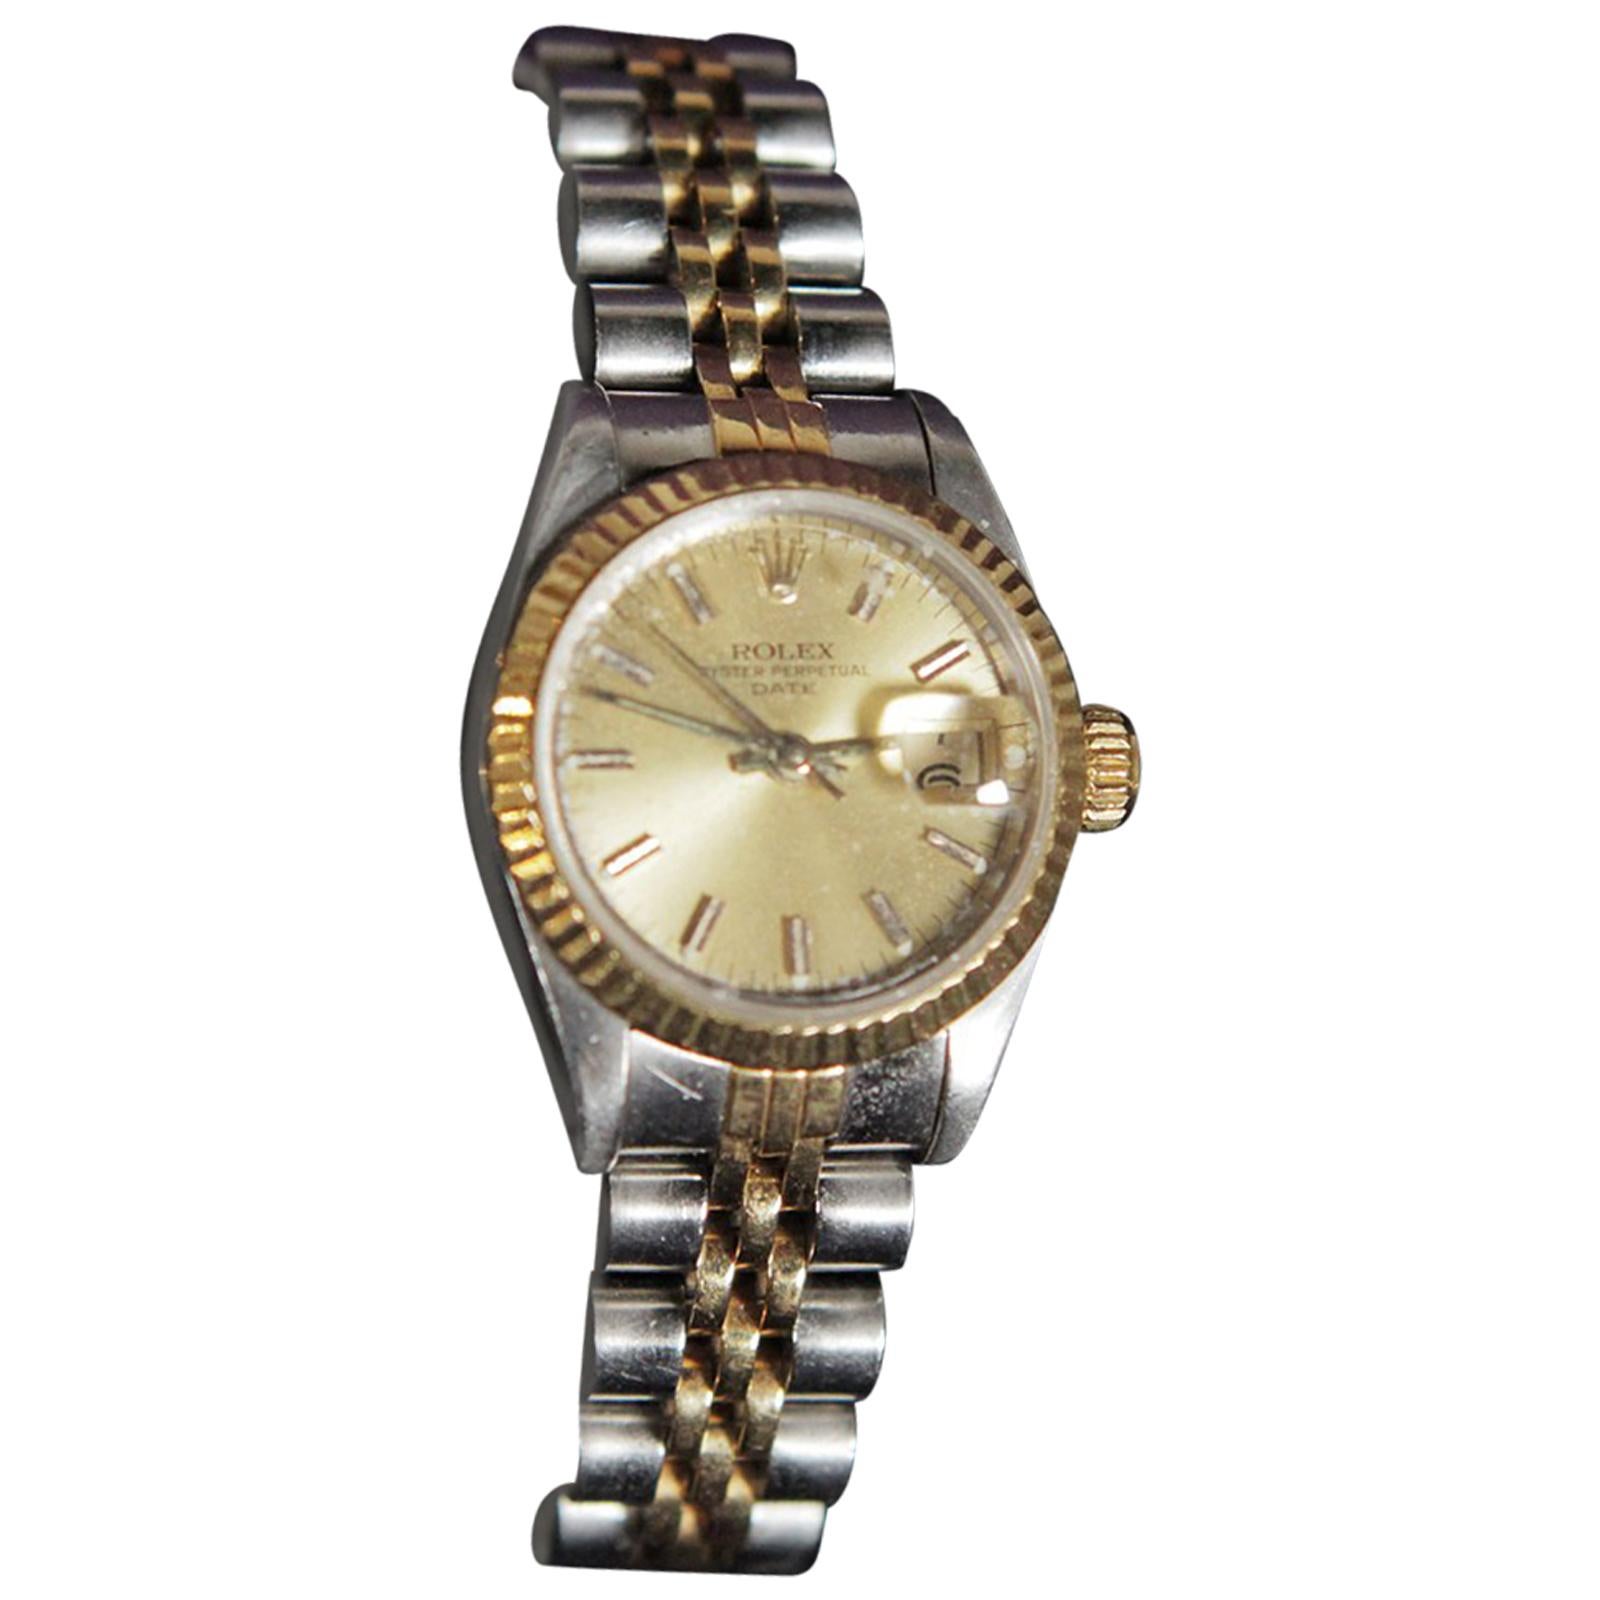 Vintage Ladies Oyster Perpetual 14-Karat Gold and Stainless Rolex Watch